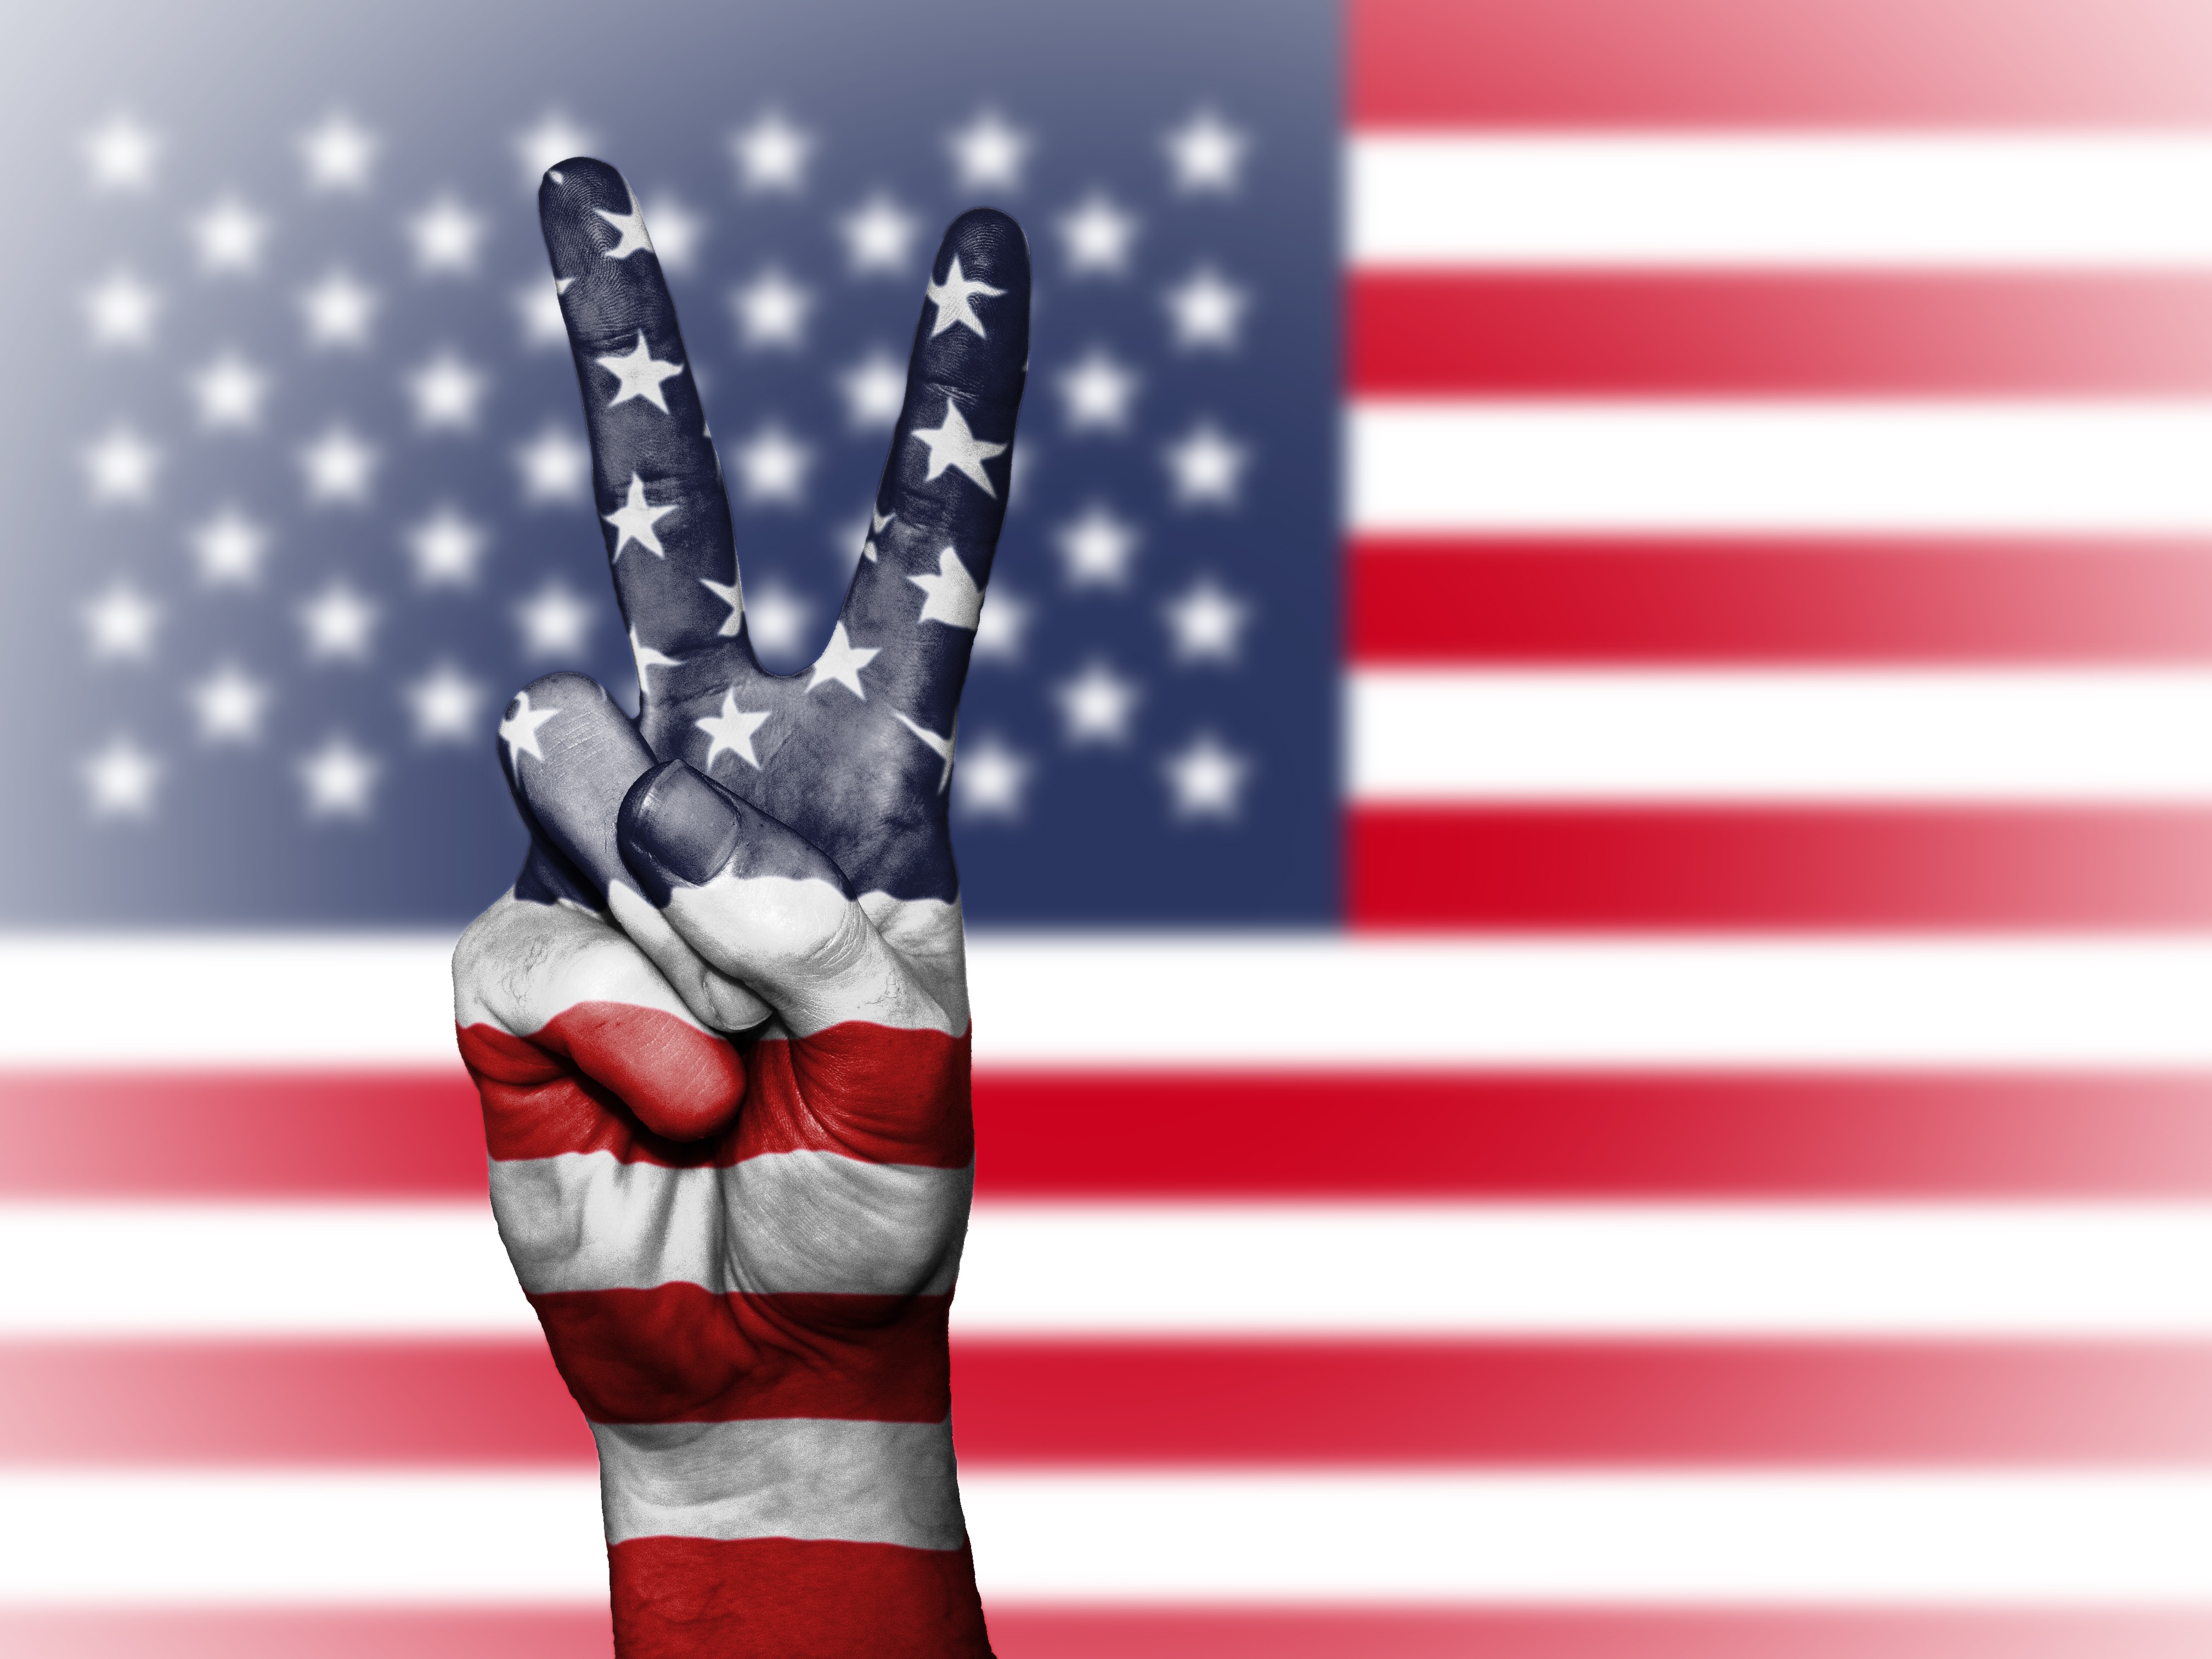 USA flag and hands making a peace sign